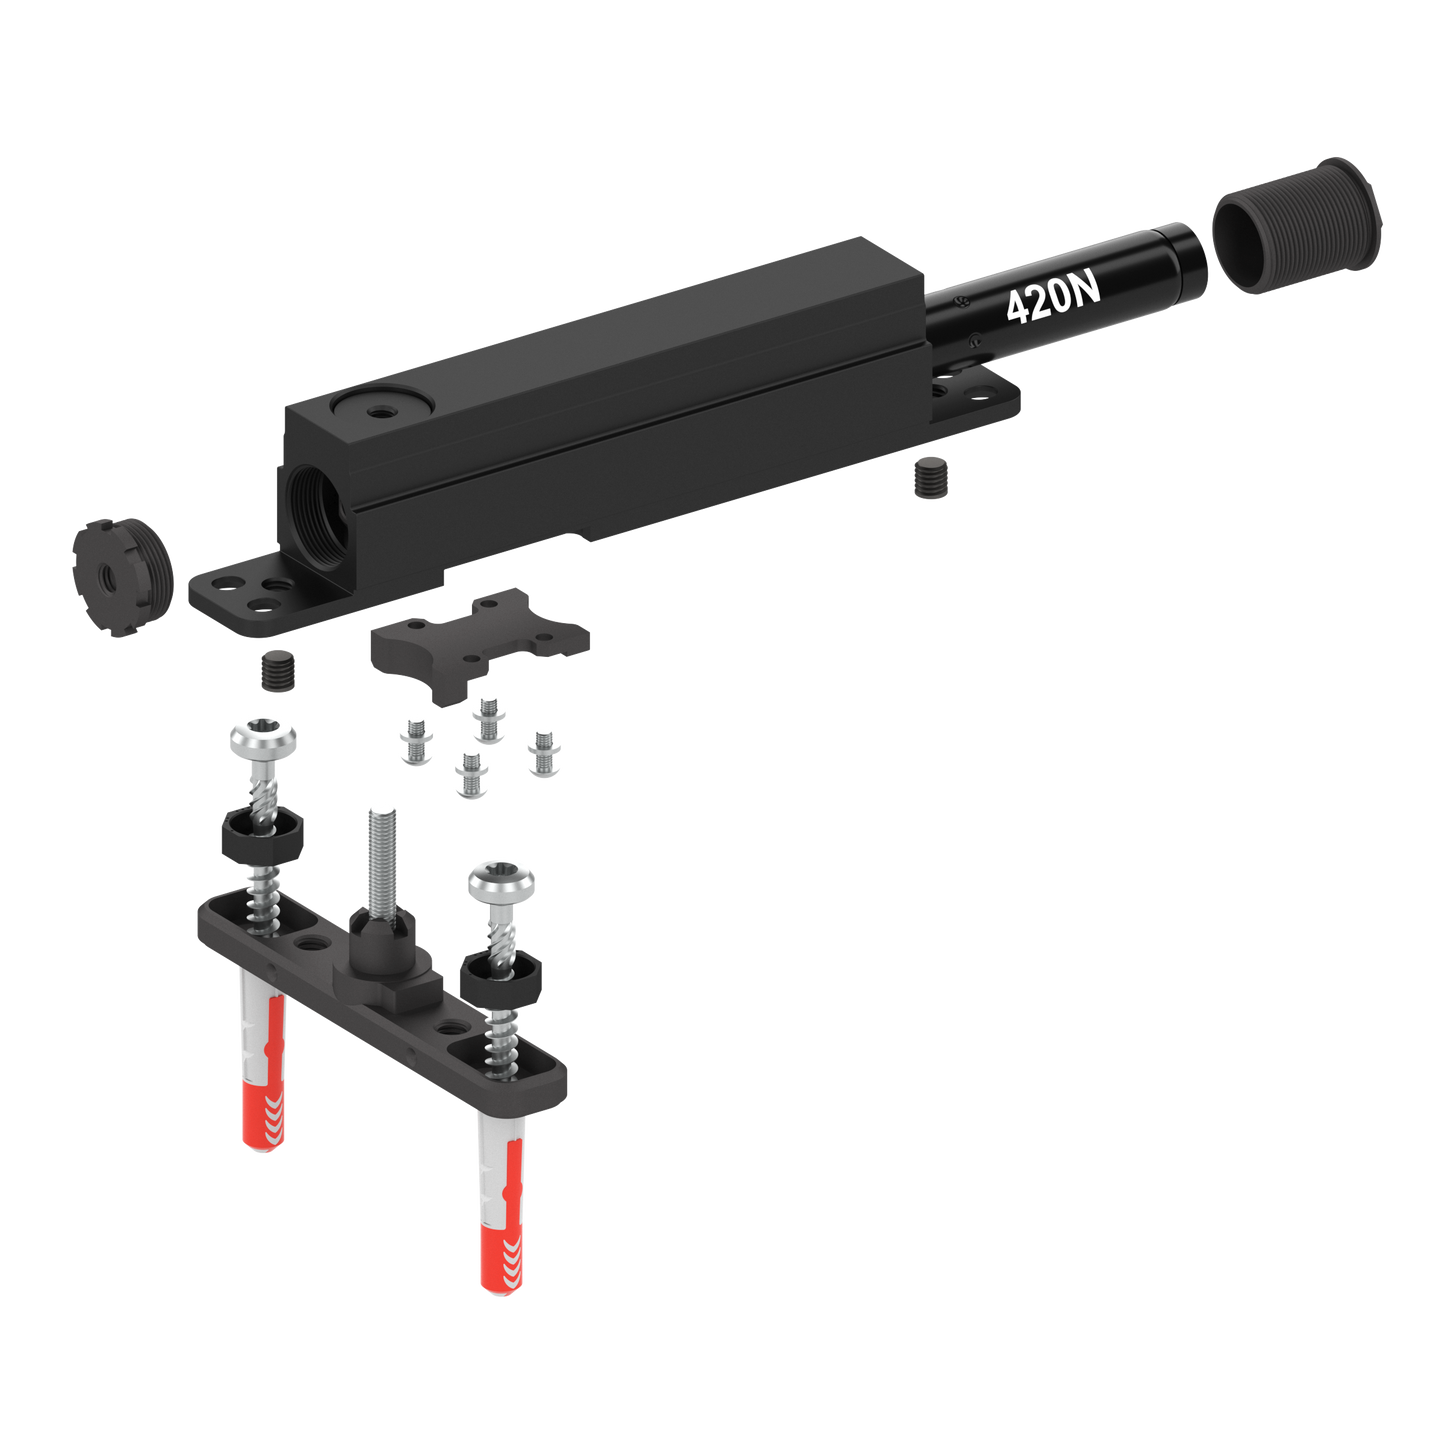 Stealthpivot NL exploded view